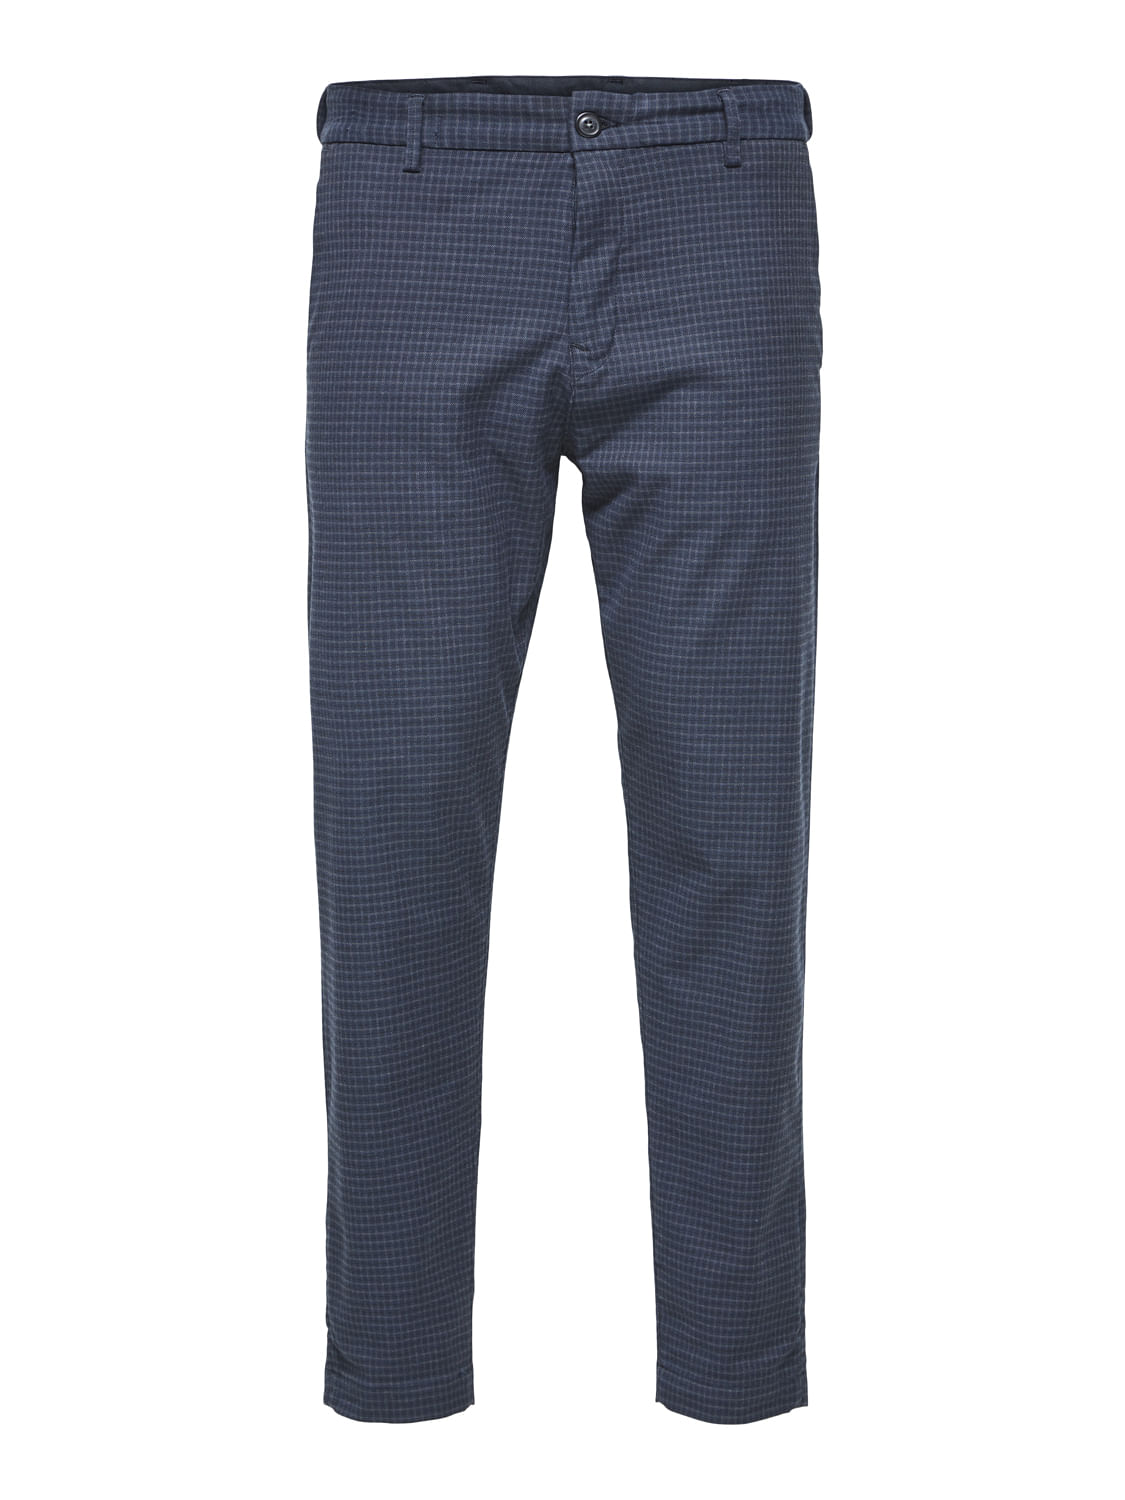 Marc Darcy  Marc Darcy Morris Blue Tweed Check Trousers  MENSWEARR